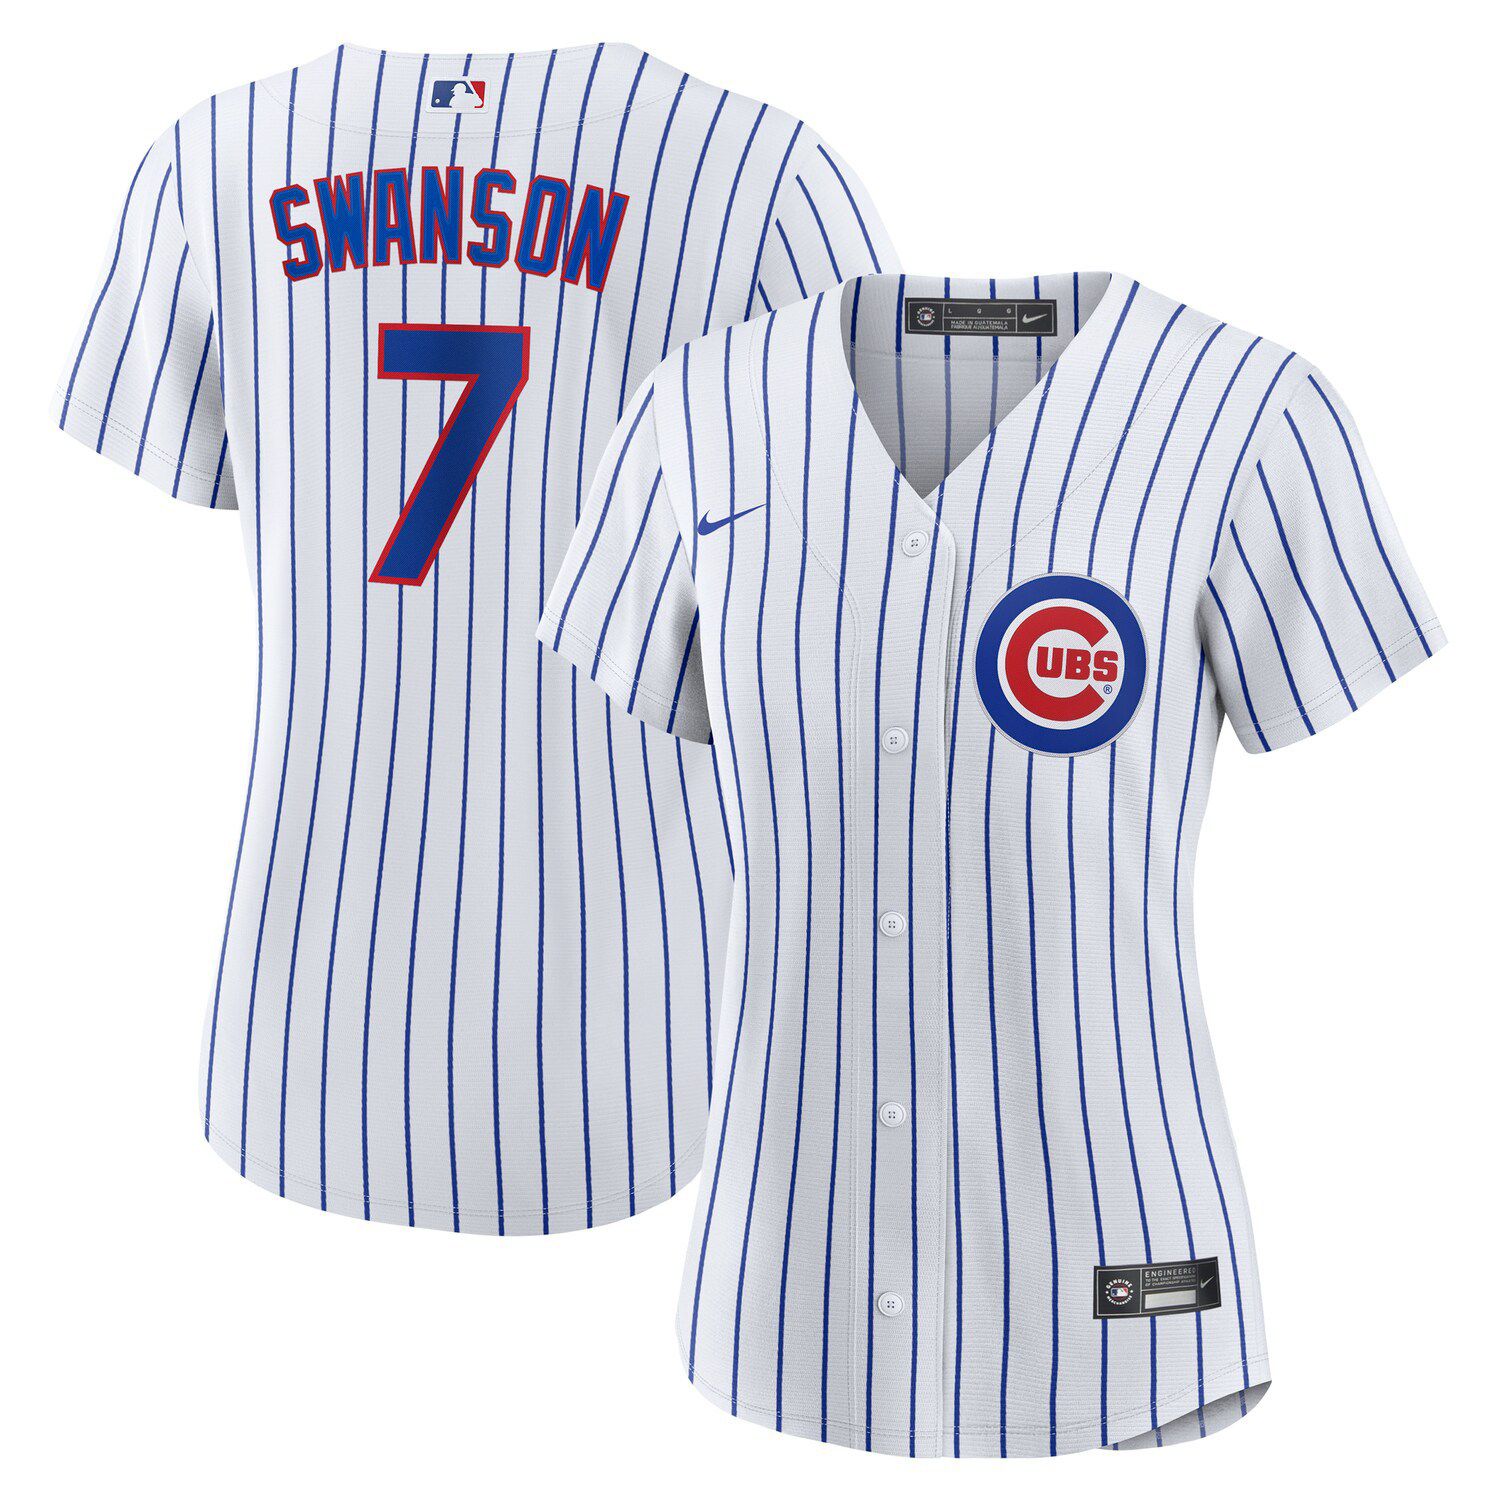 Men's Nike Ernie Banks White Chicago Cubs Home Cooperstown Collection  Player Jersey